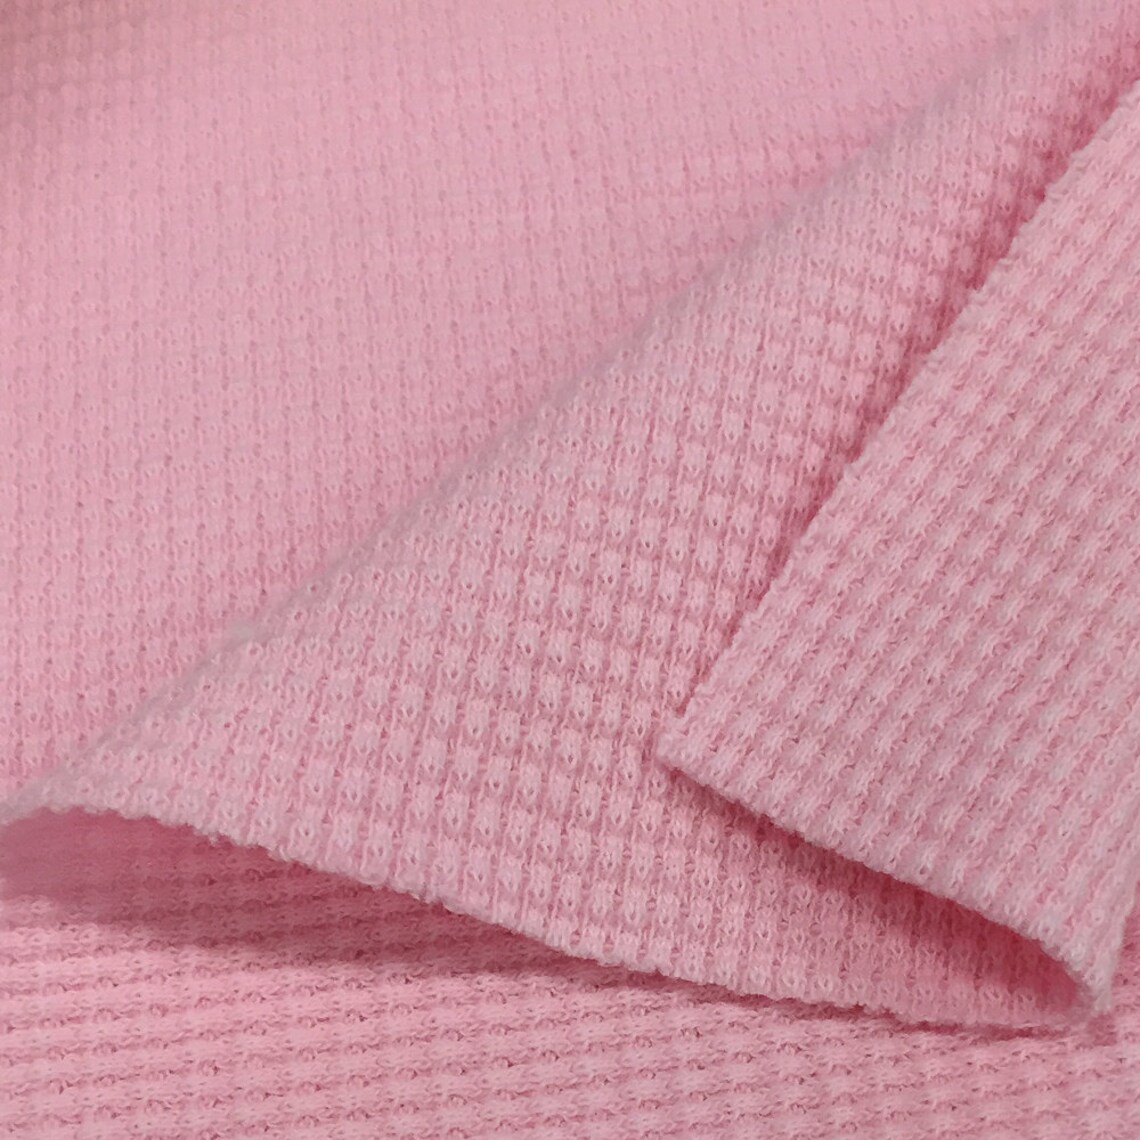 Stretchy Thermal Knit Fabric - Etsy